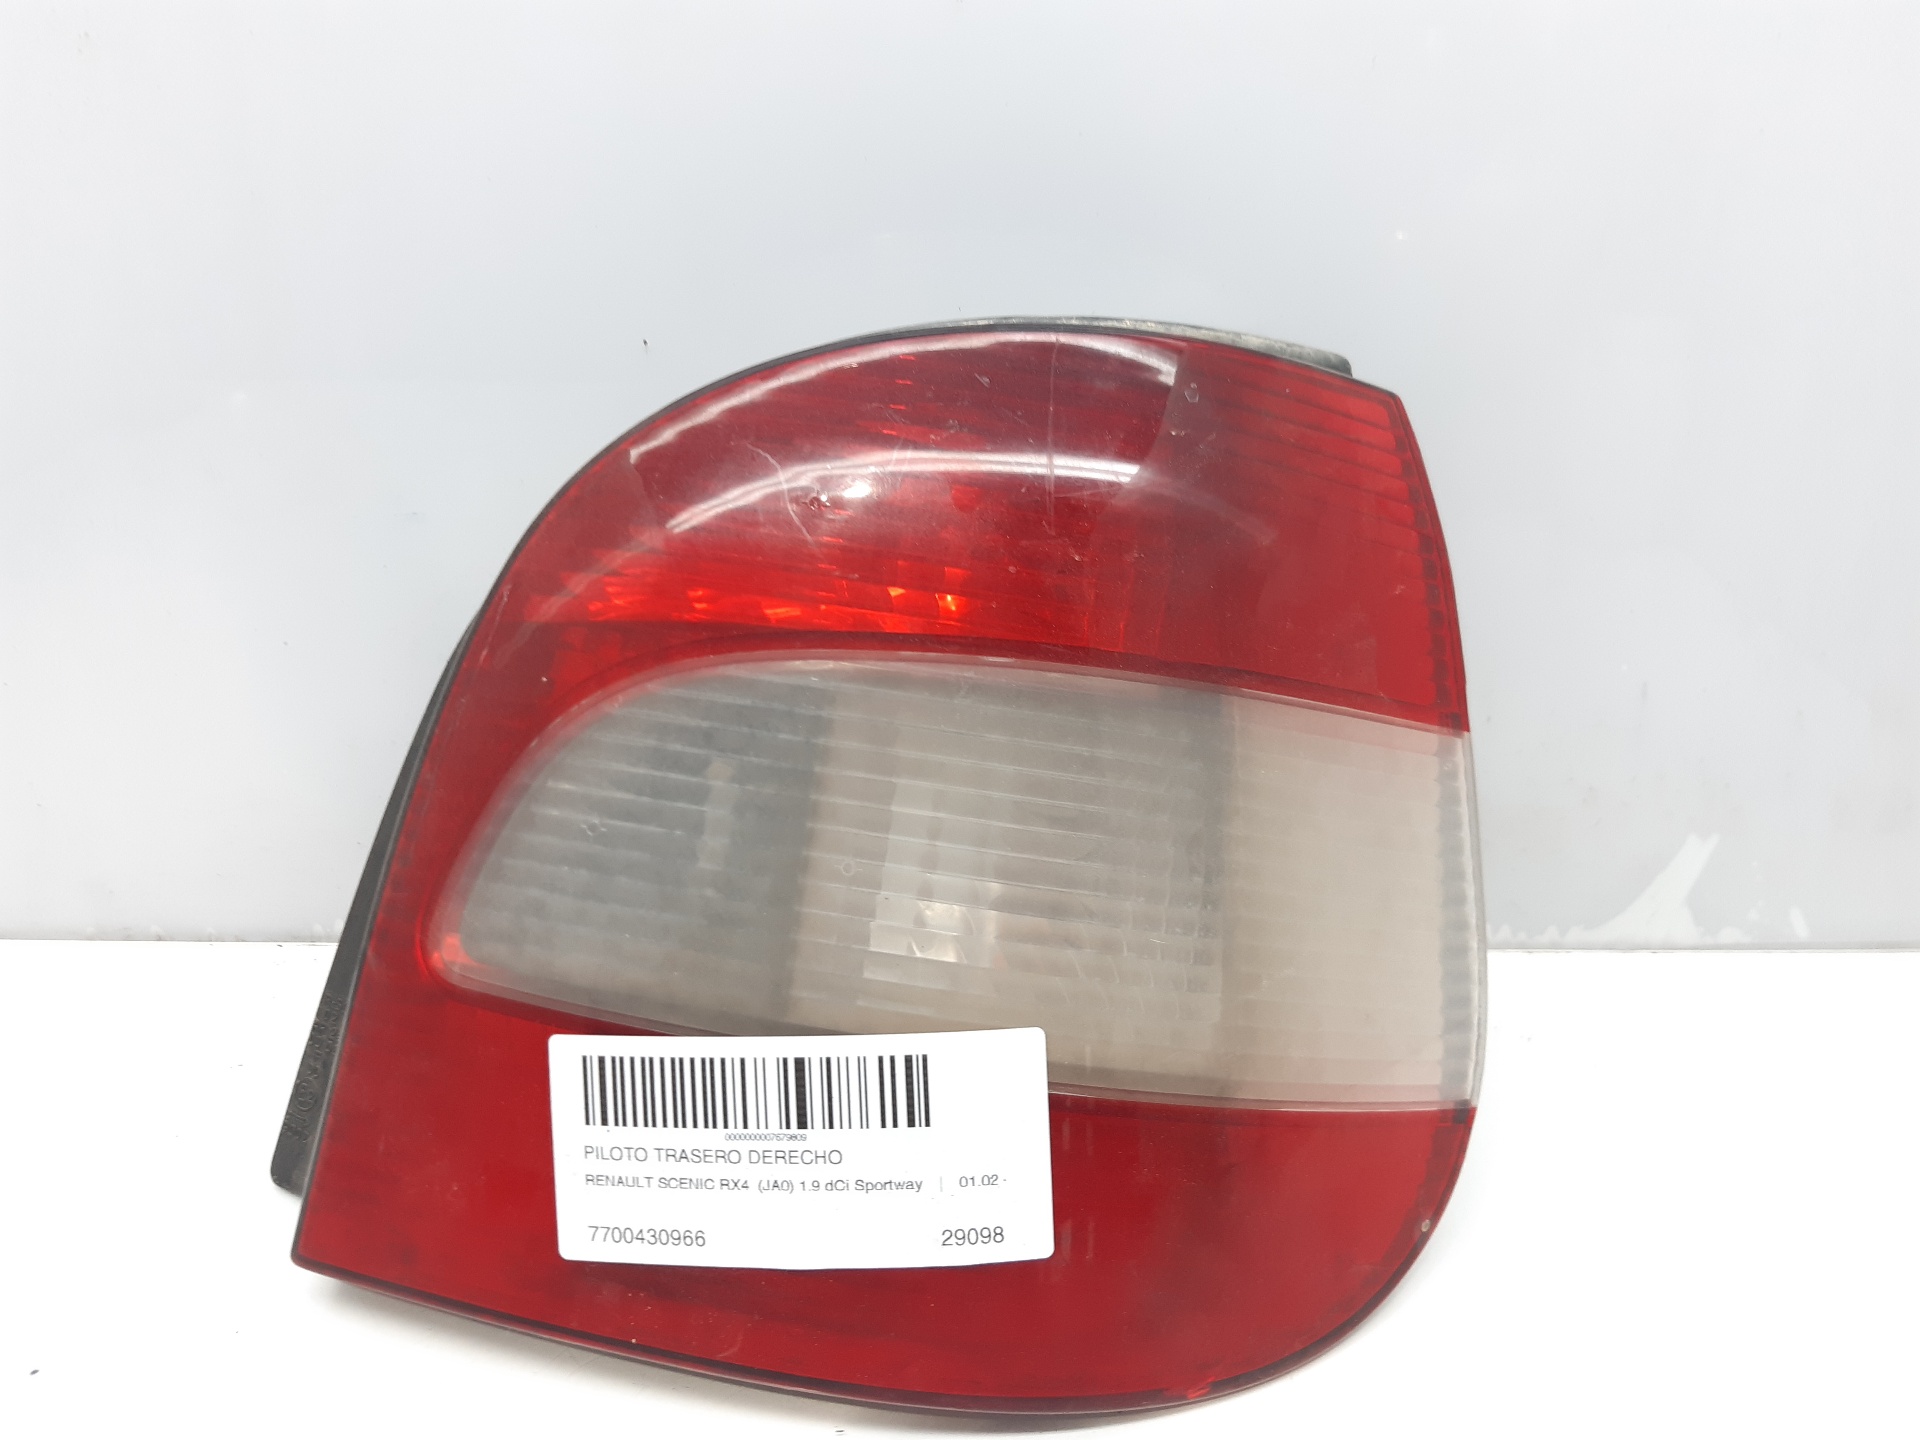 RENAULT Scenic 1 generation (1996-2003) Rear Right Taillight Lamp 7700430966 22460054